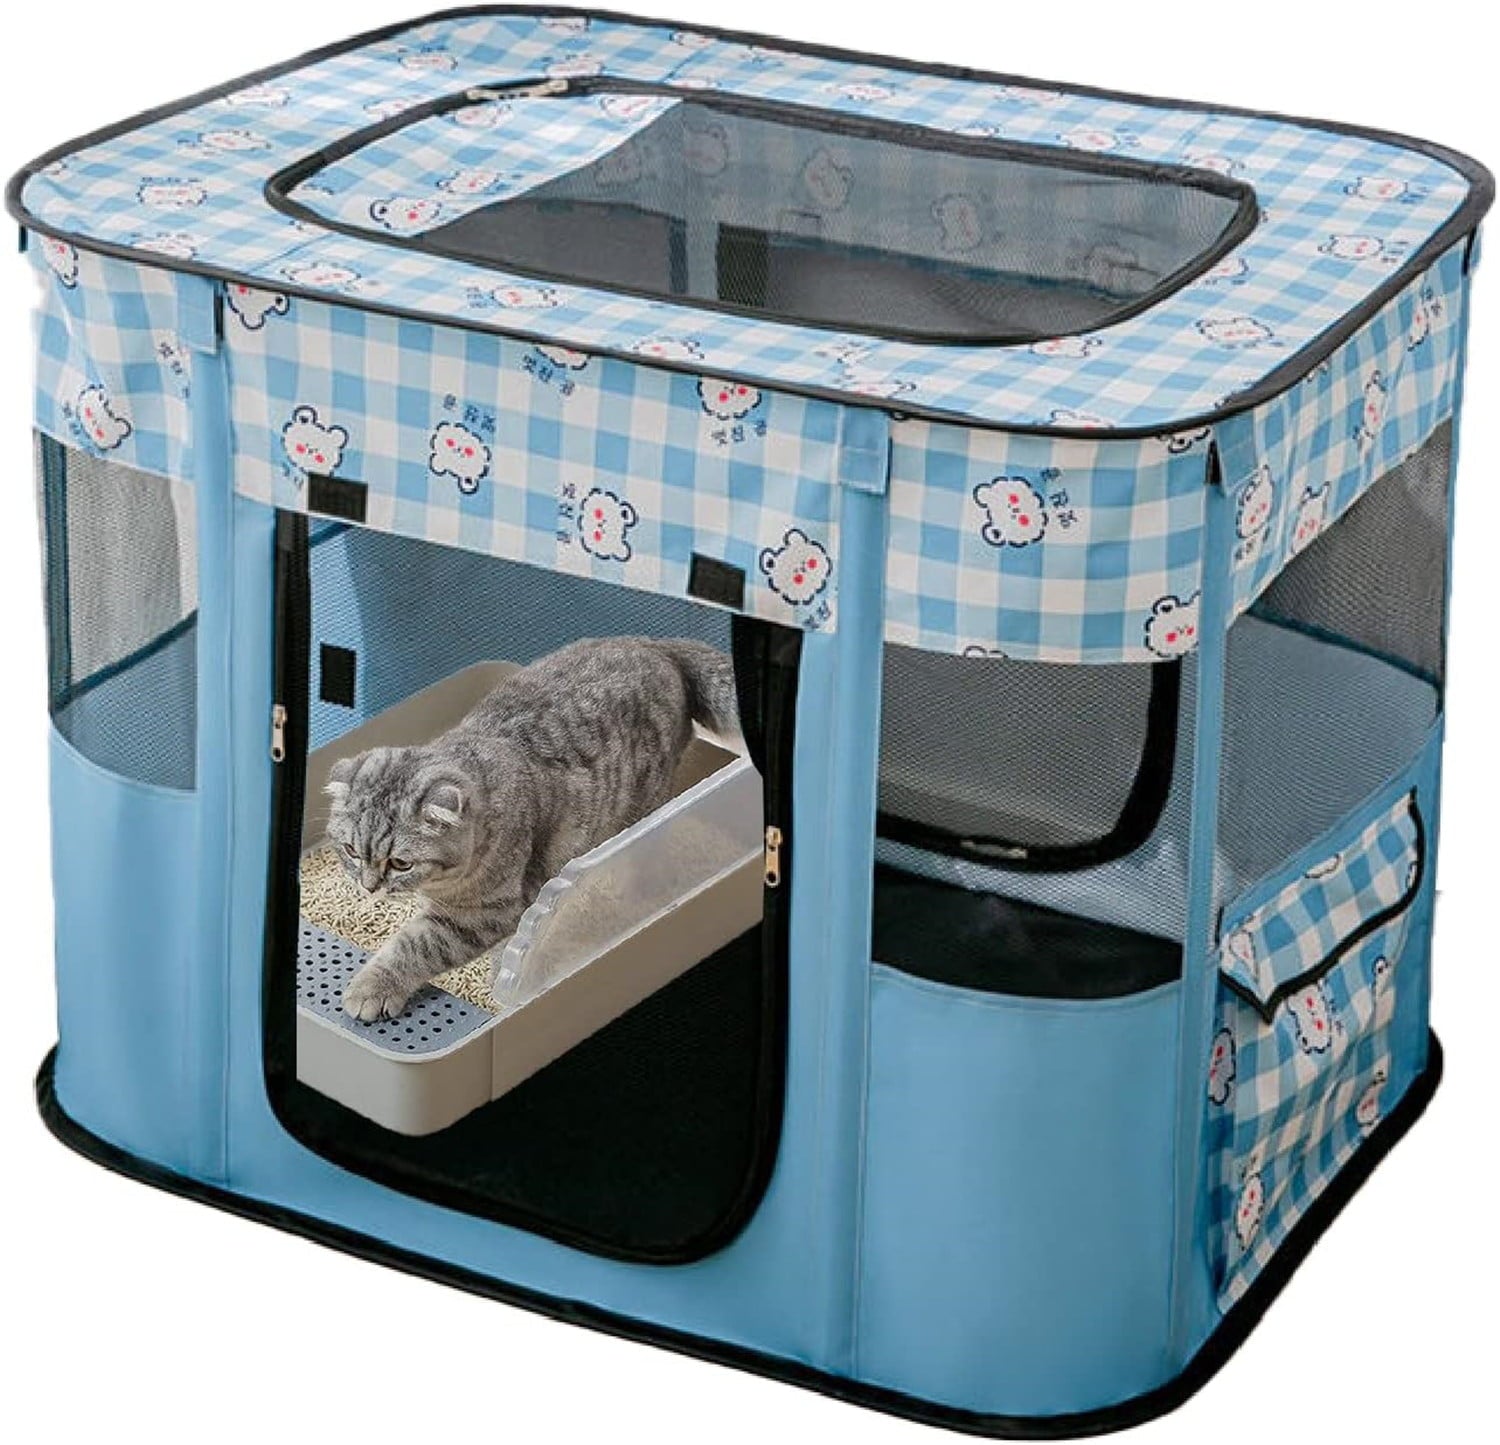 Portable Dog Playpen|  Dog House Indoor Outdoor| Pet Playpen for Small Dogs| Dog Travel Accessories Cat Kennel